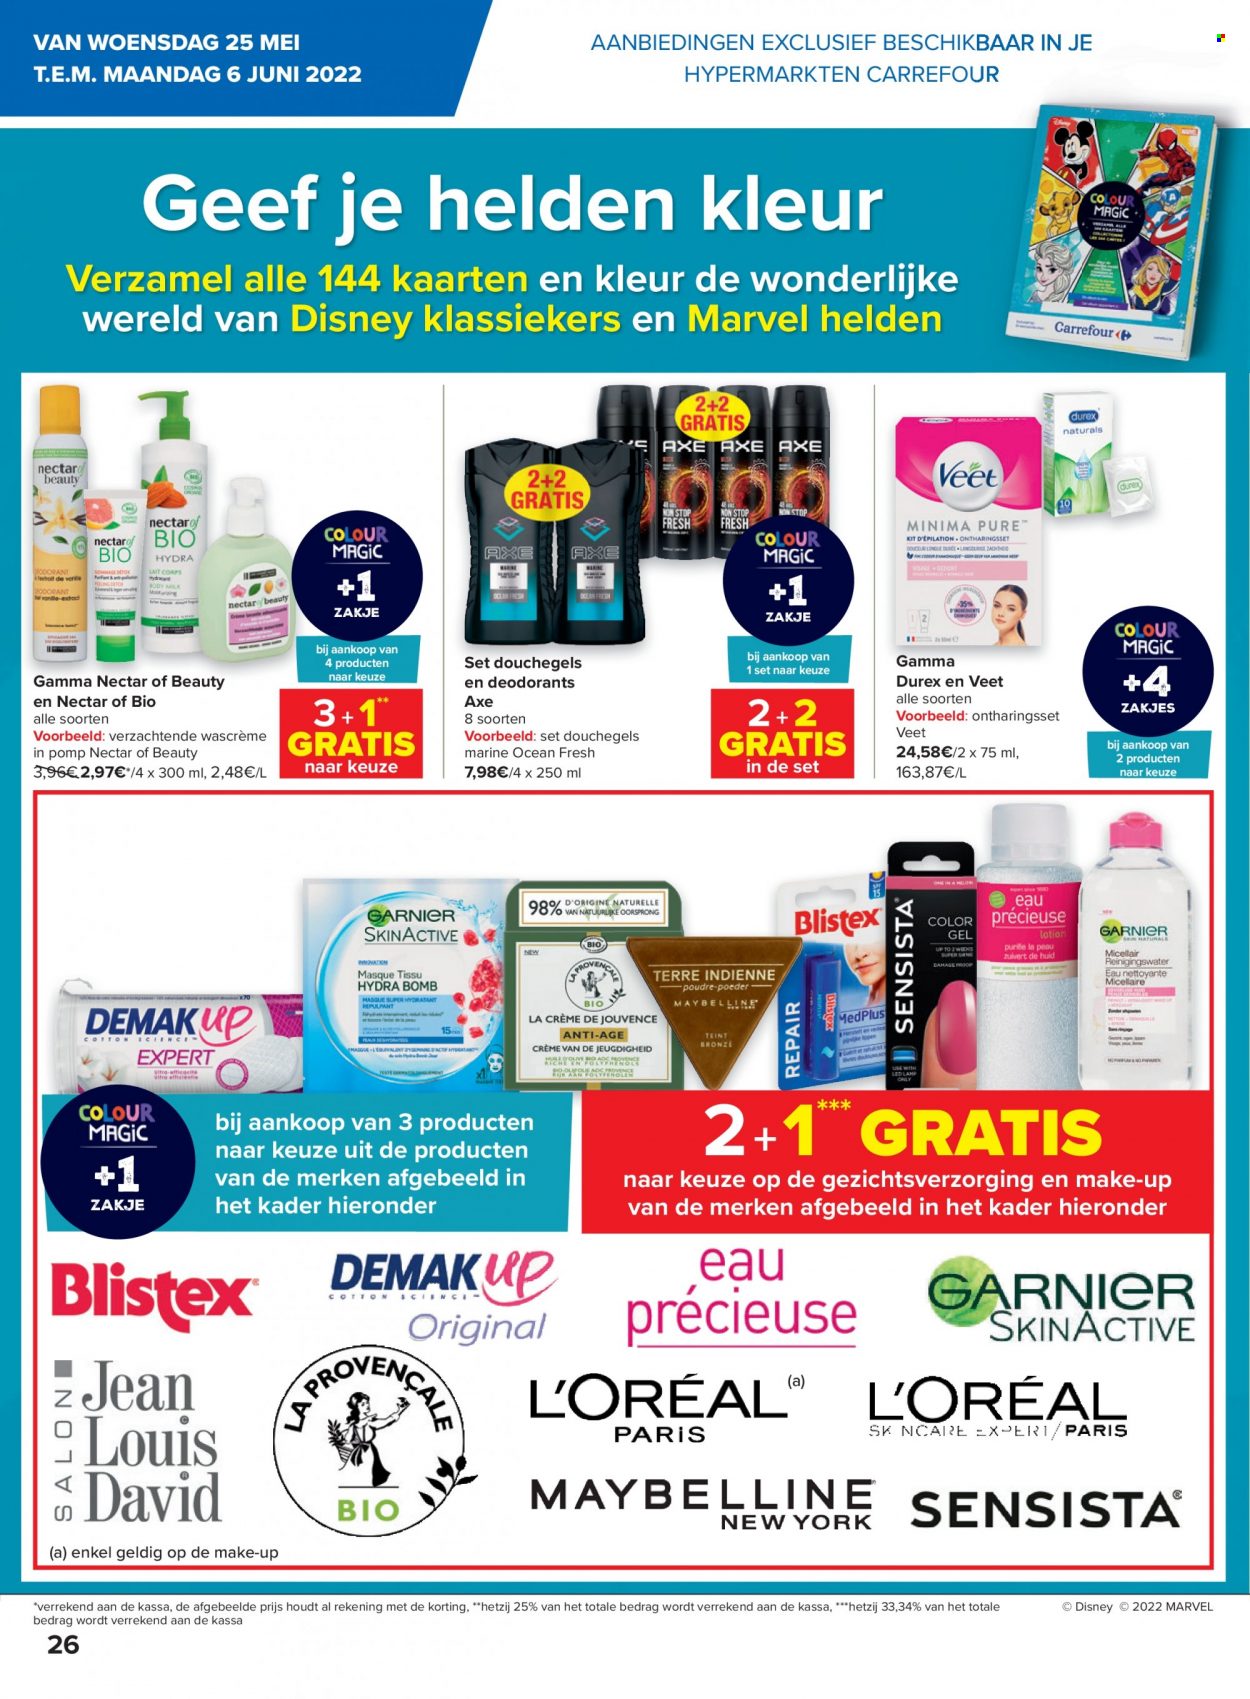 Catalogue Carrefour hypermarkt - 24.5.2022 - 30.5.2022. Page 26.